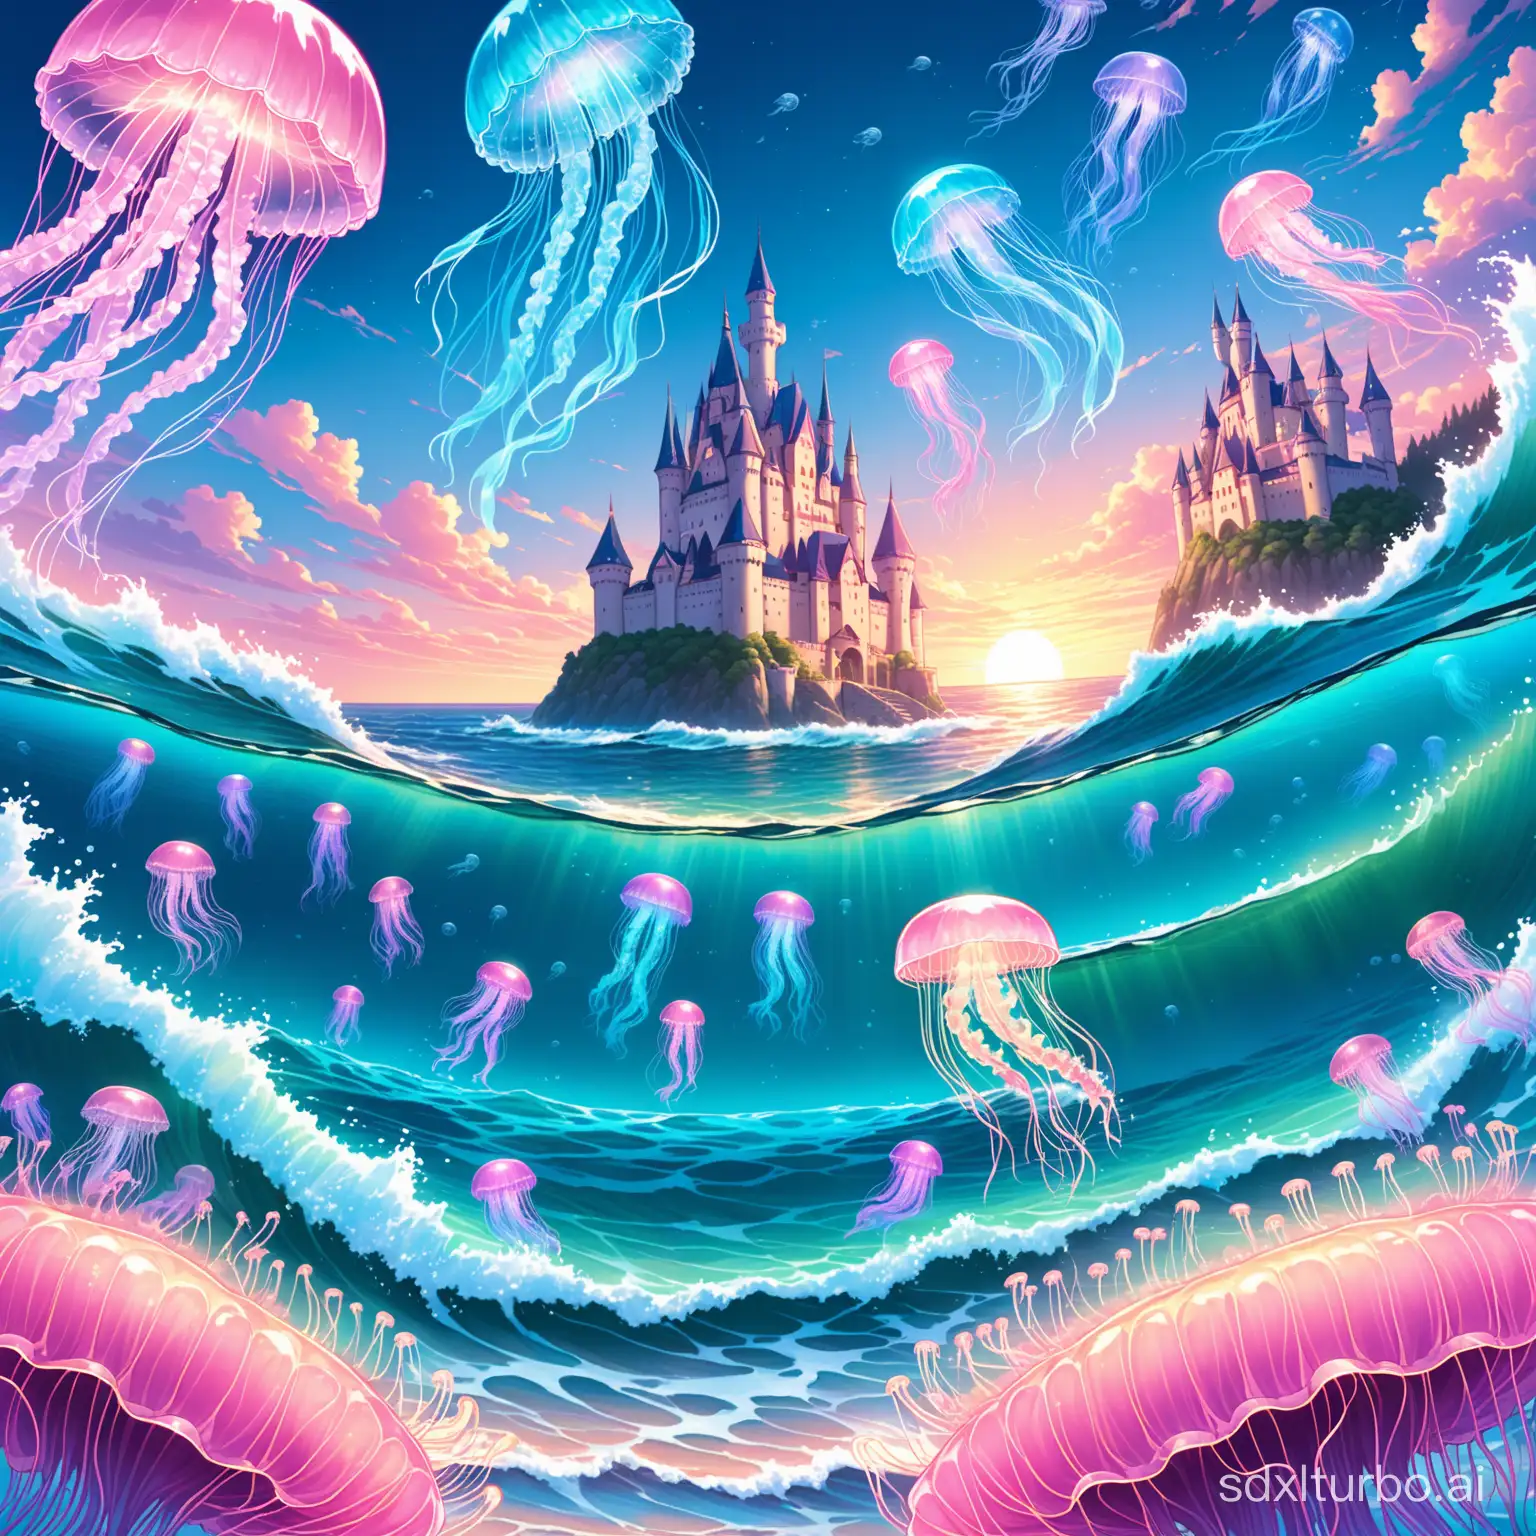 Underwater-Scene-with-Pink-Jellyfish-and-Blue-Waves-near-a-Castle